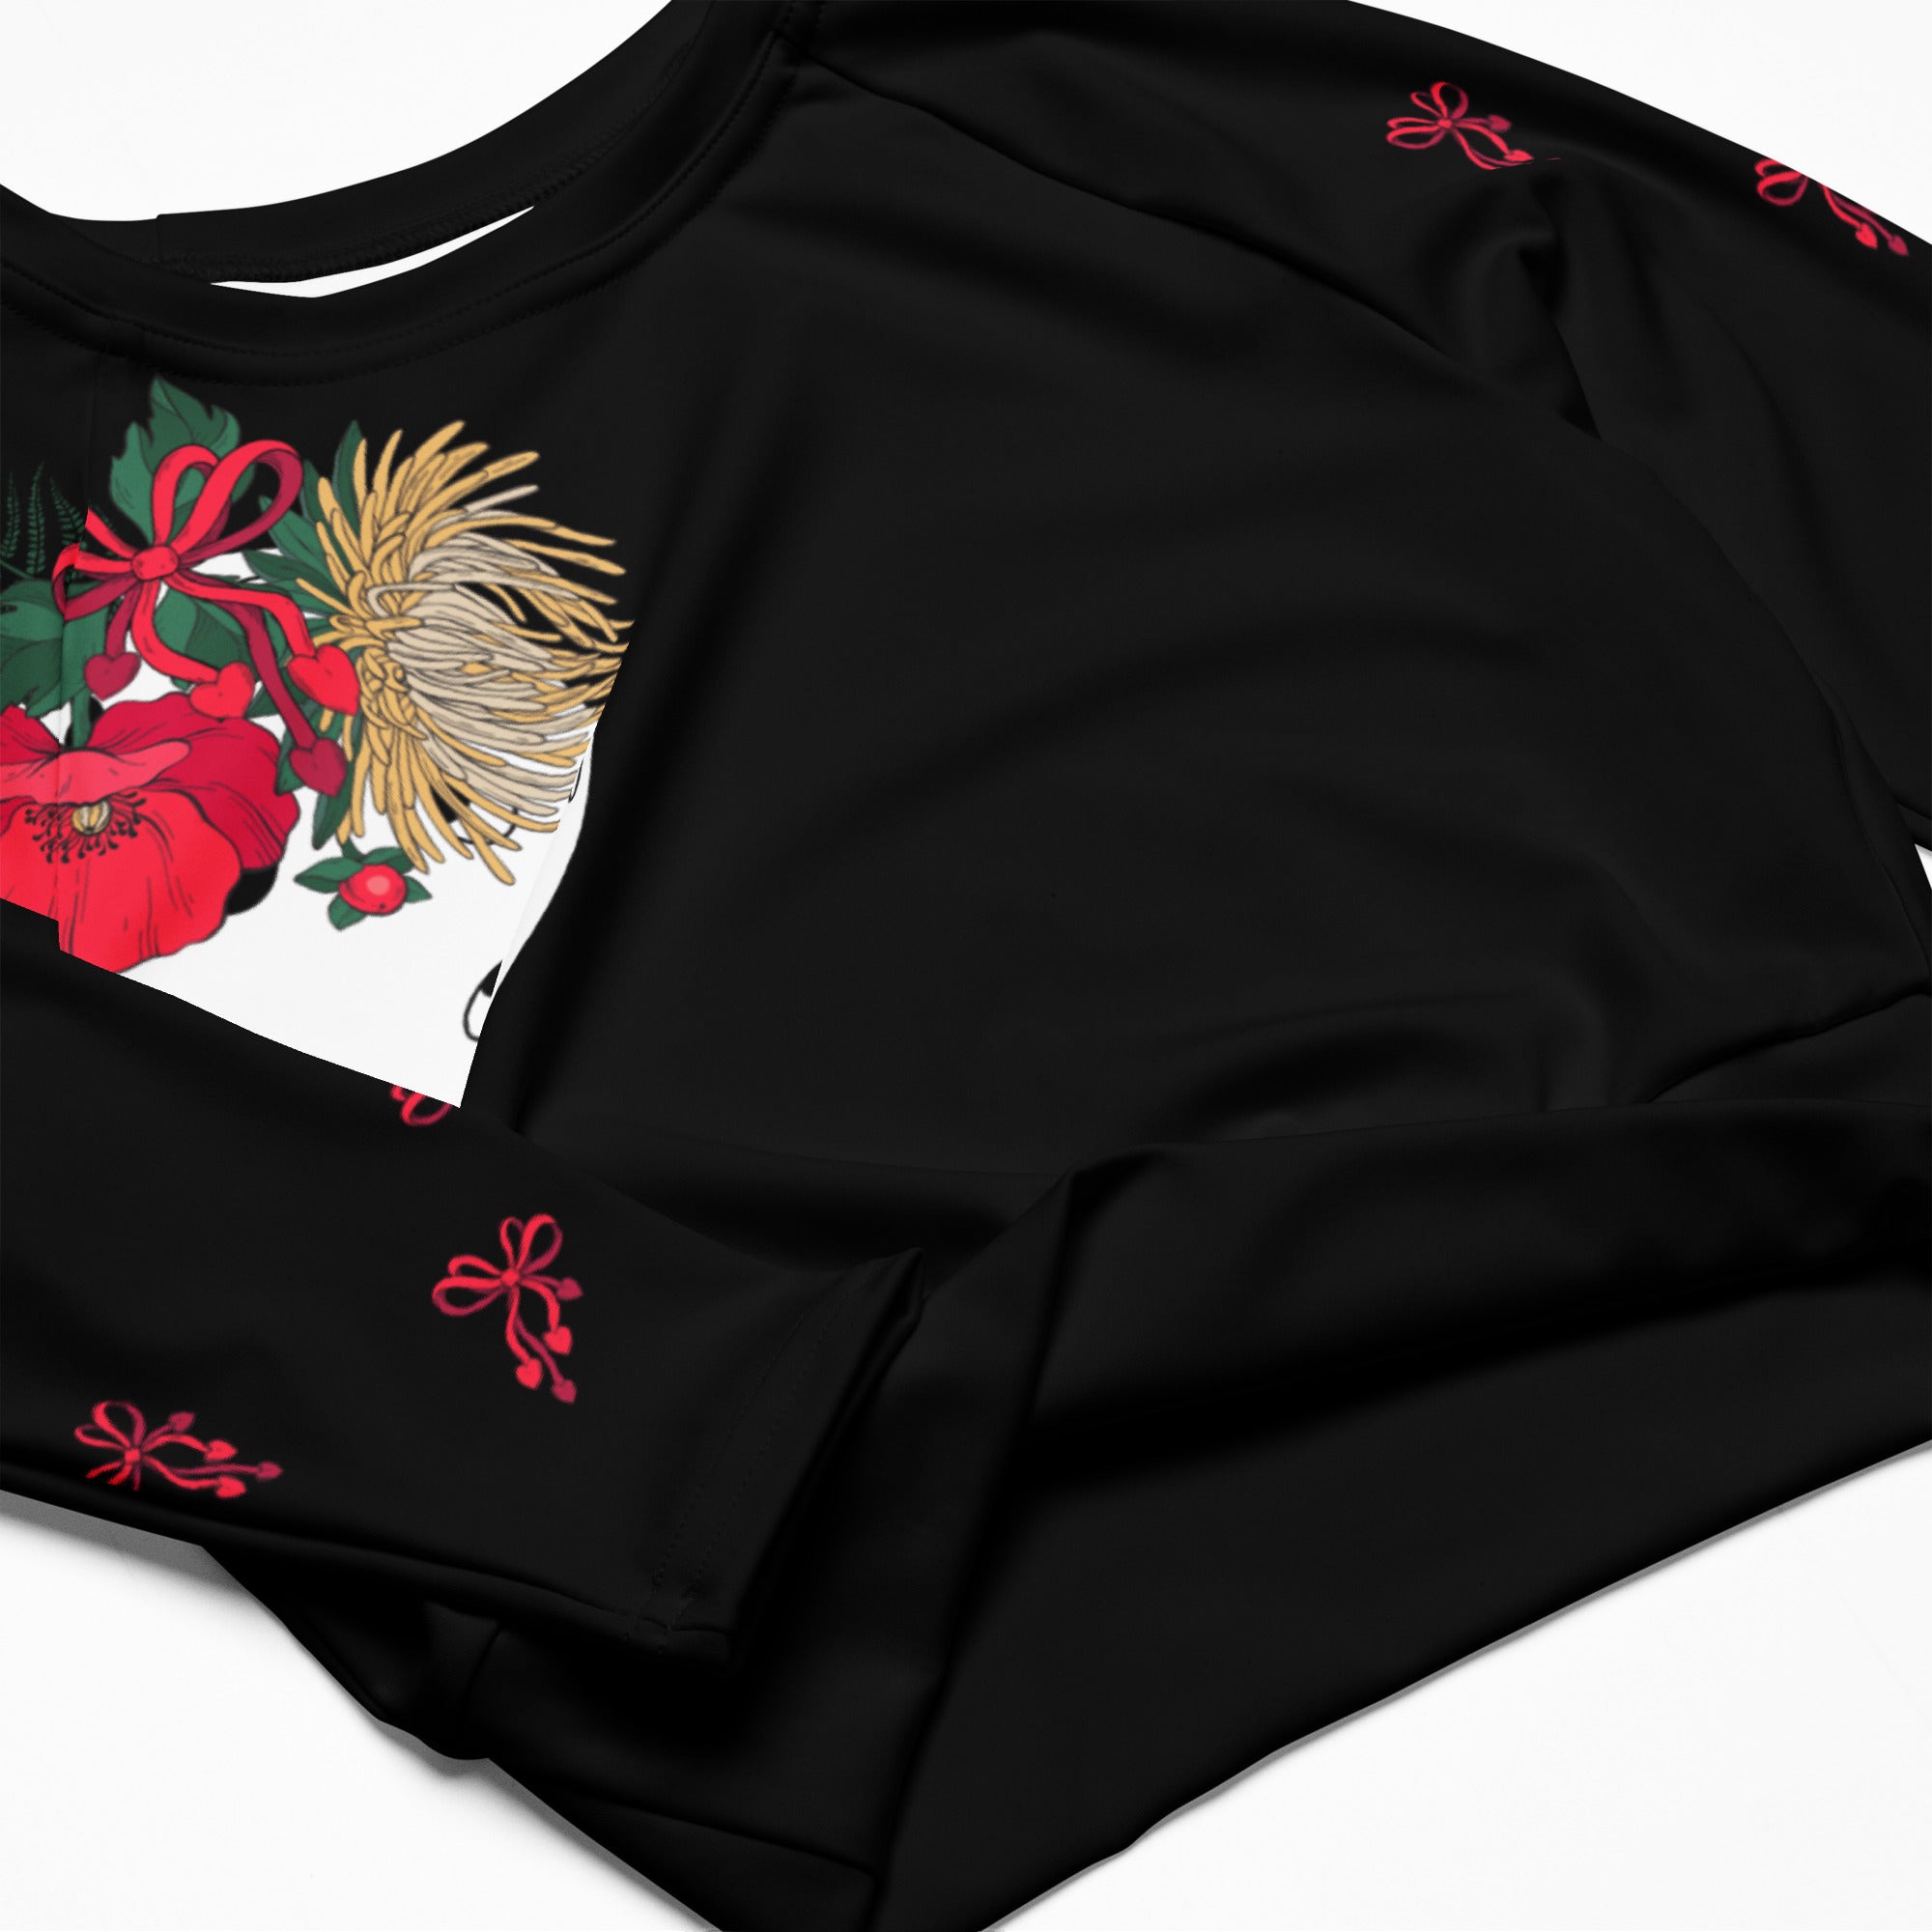 Put a Bow on it!©  Long-sleeve Crop top, UPF 50+ for Pickleball Enthusiasts